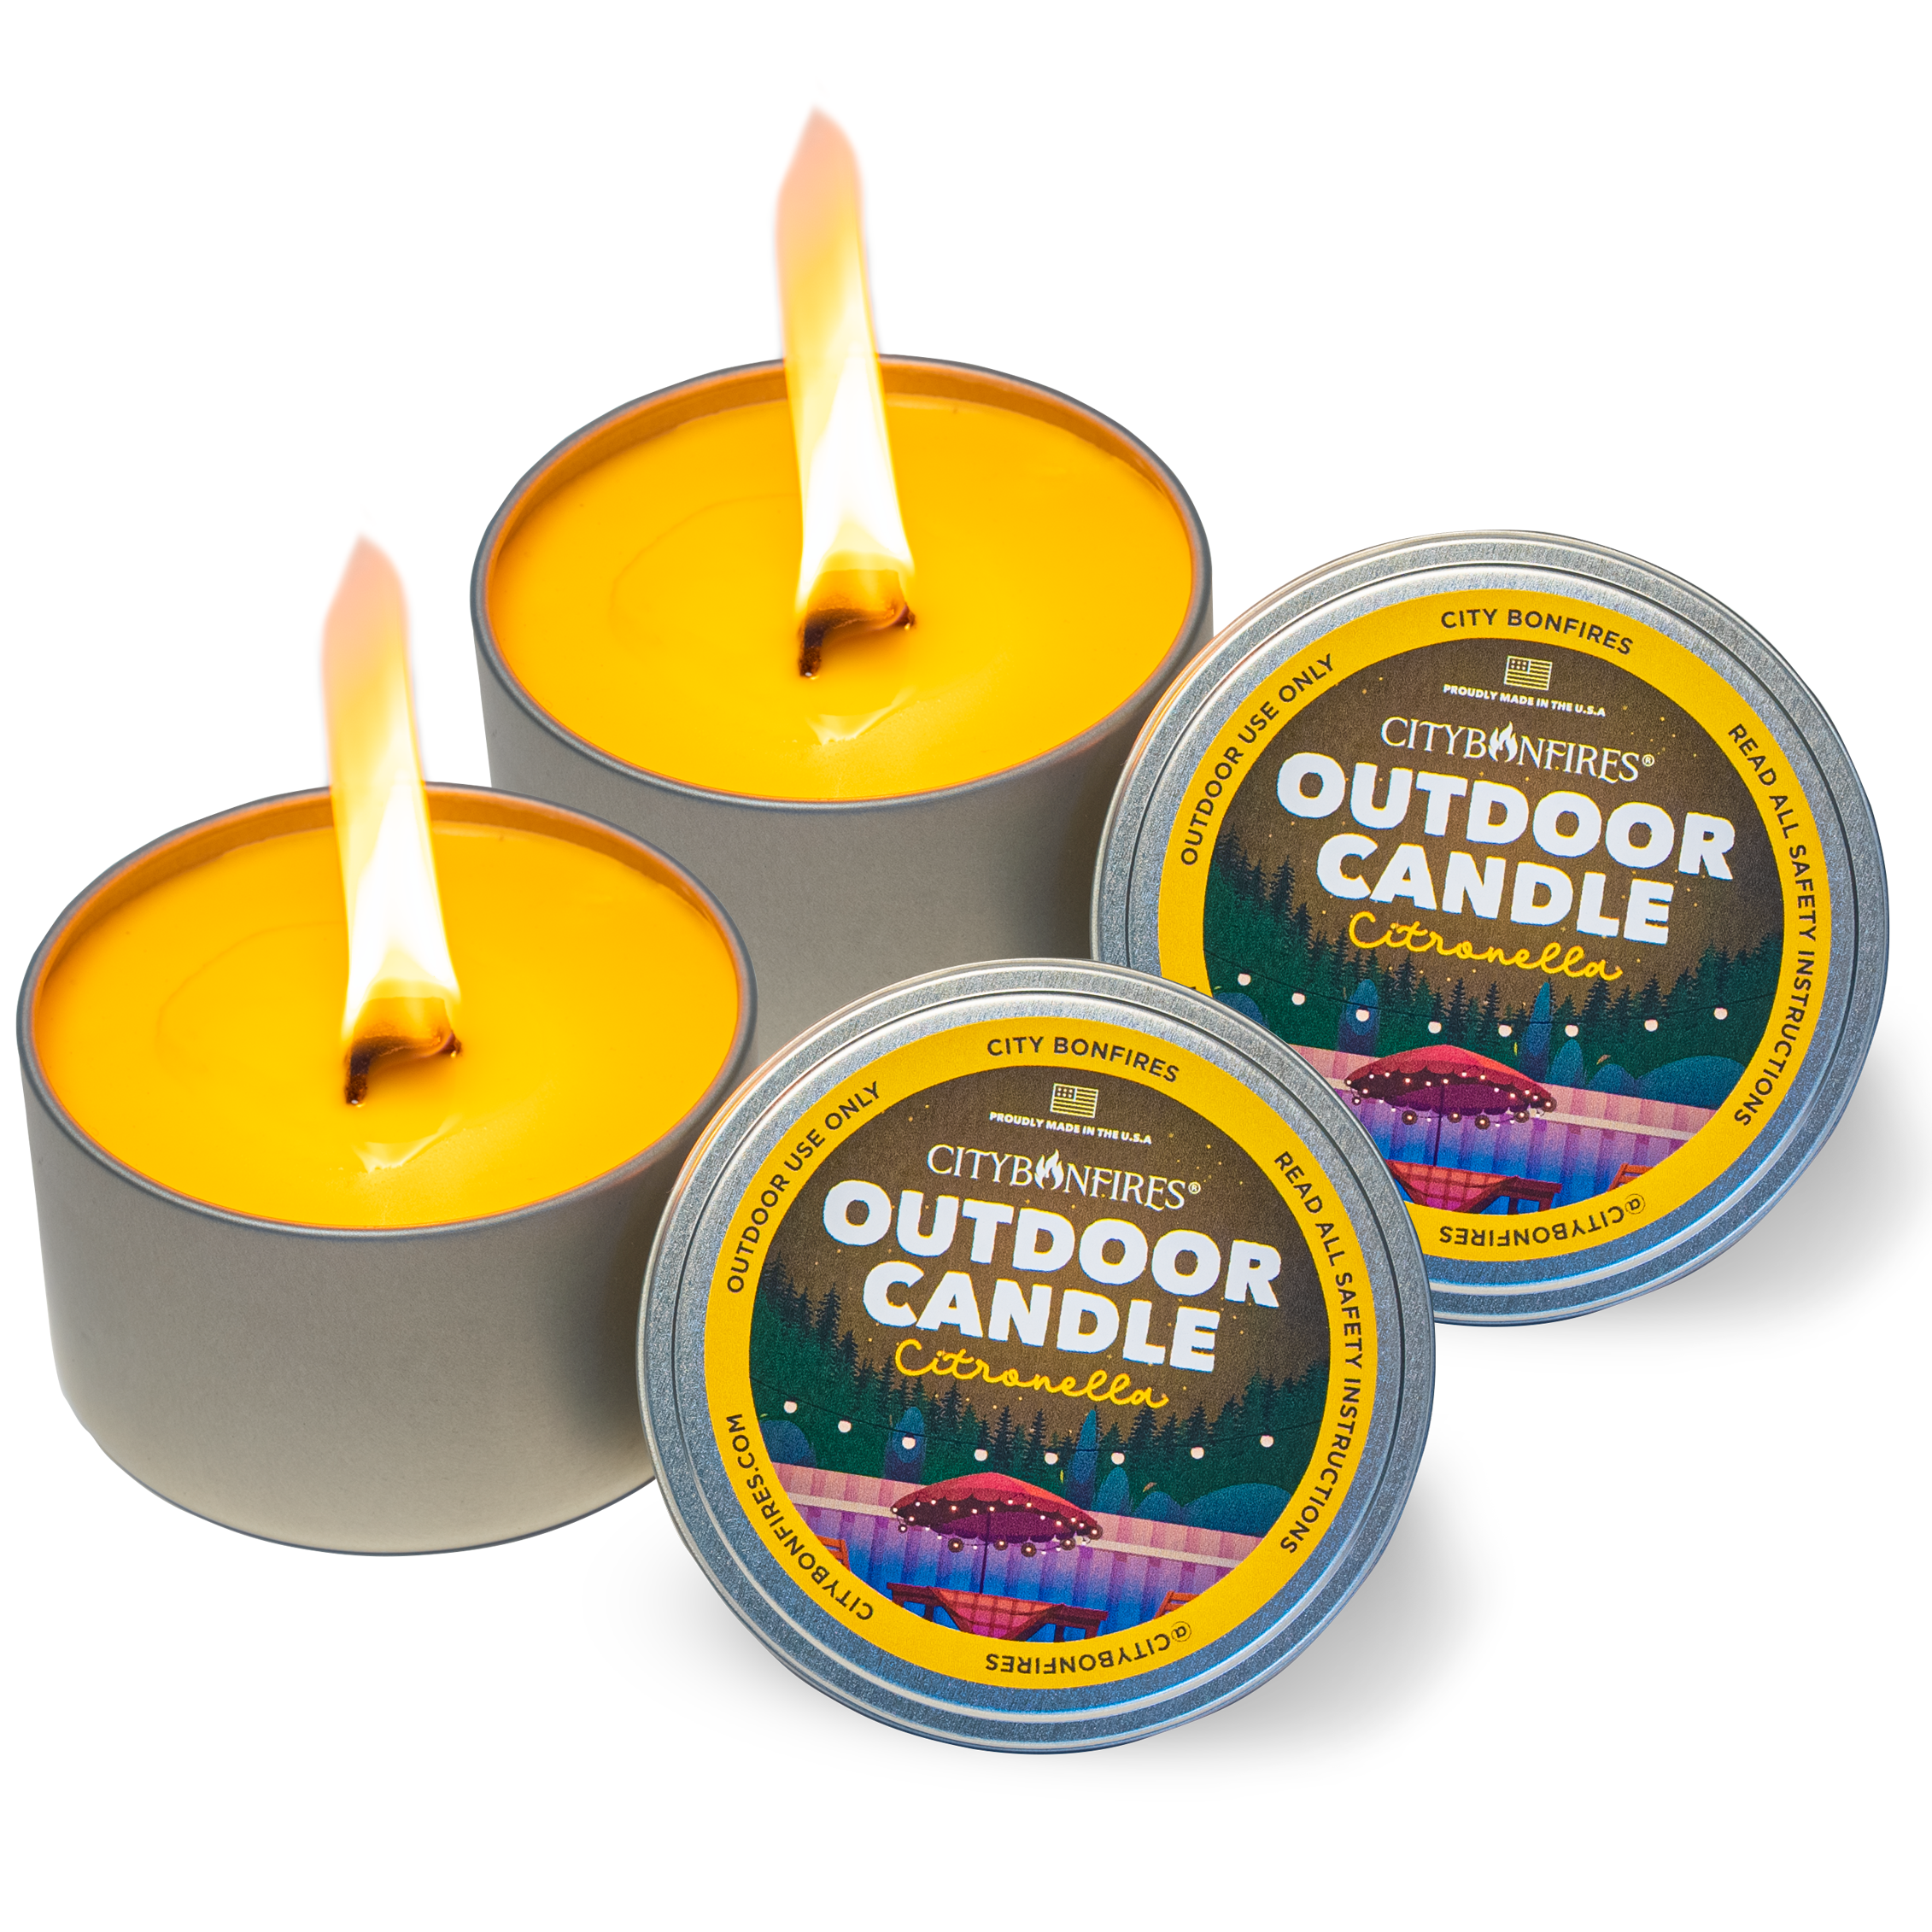 The Outdoor Candle - Citronella